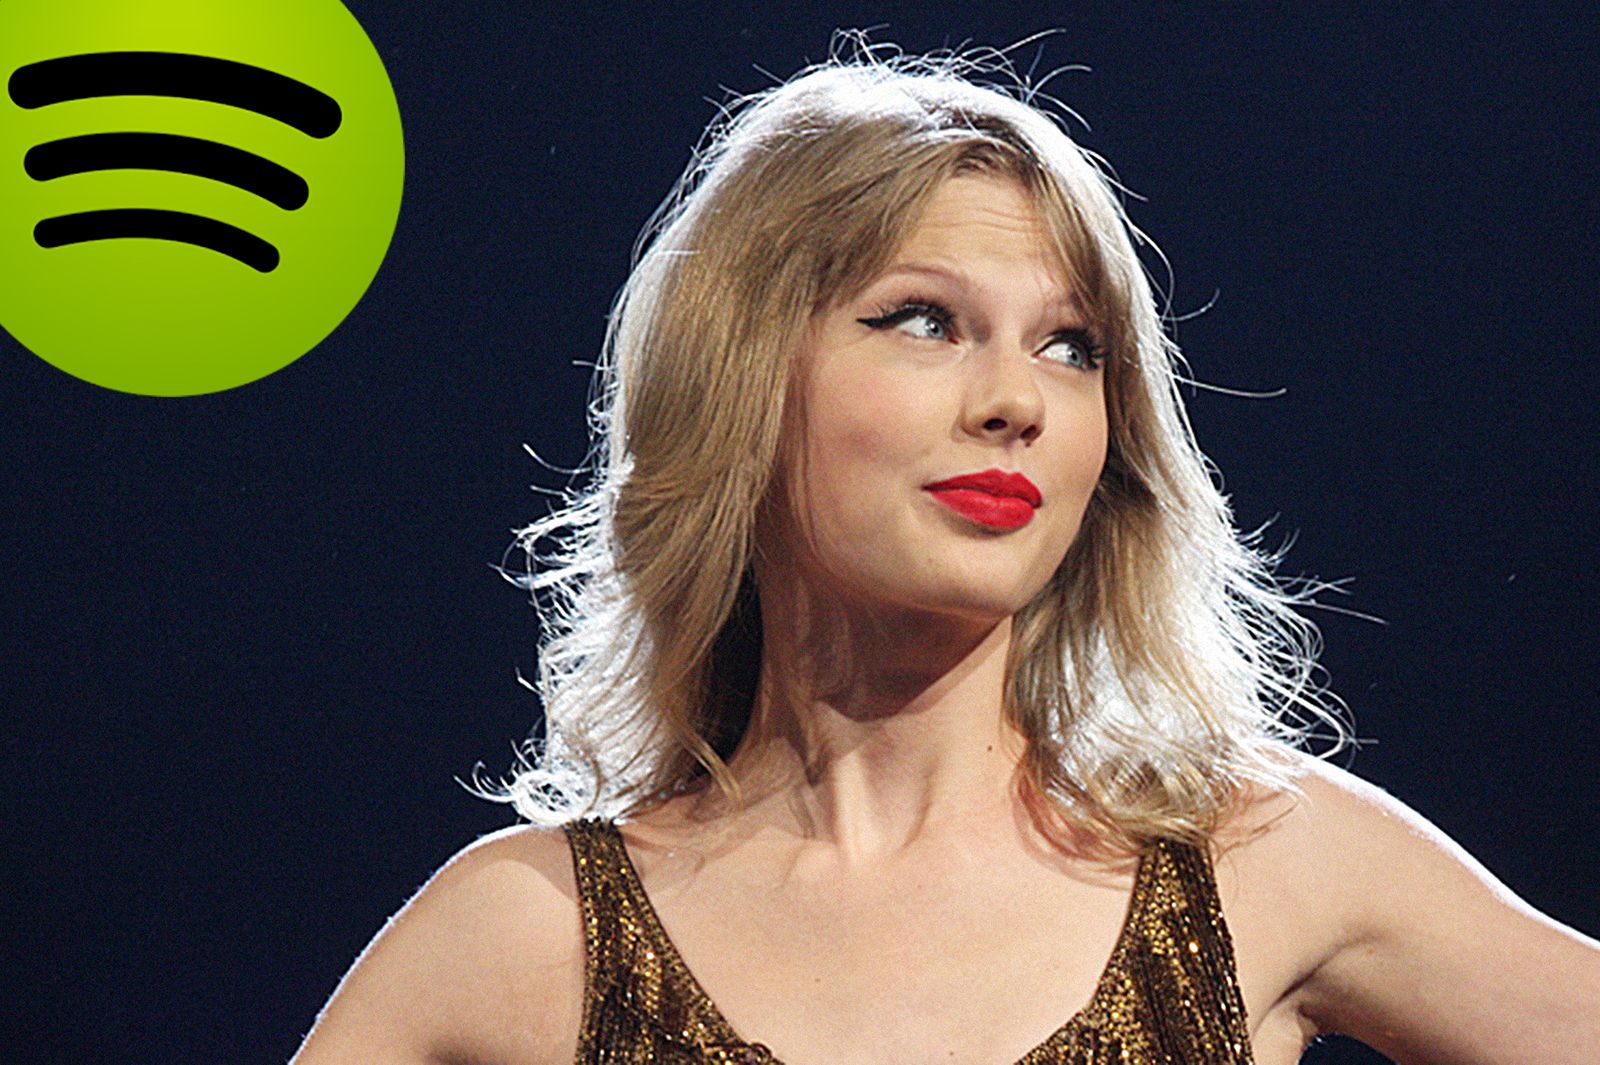 spotify has paid 2 billion in royalties claims spotify ceo in response to taylor swift image 1